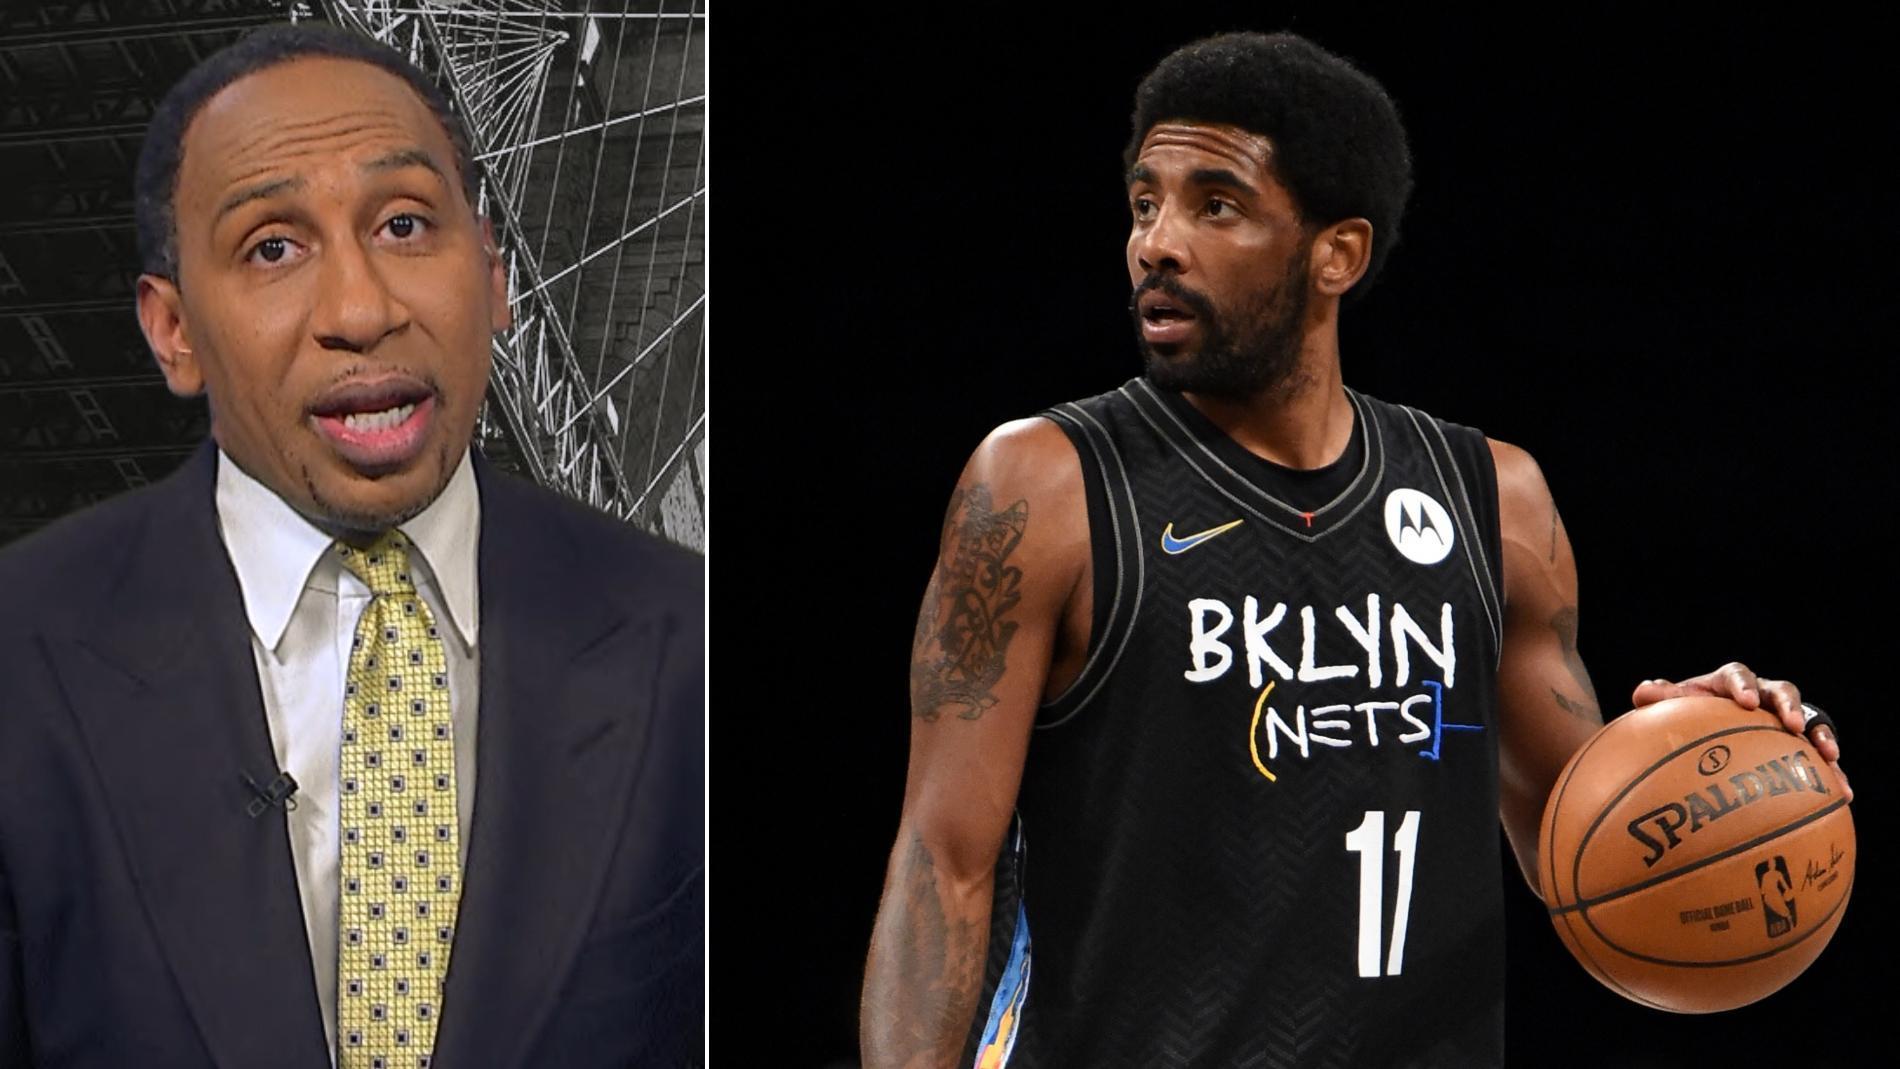 Stephen A. has issues with Kyrie's random absences